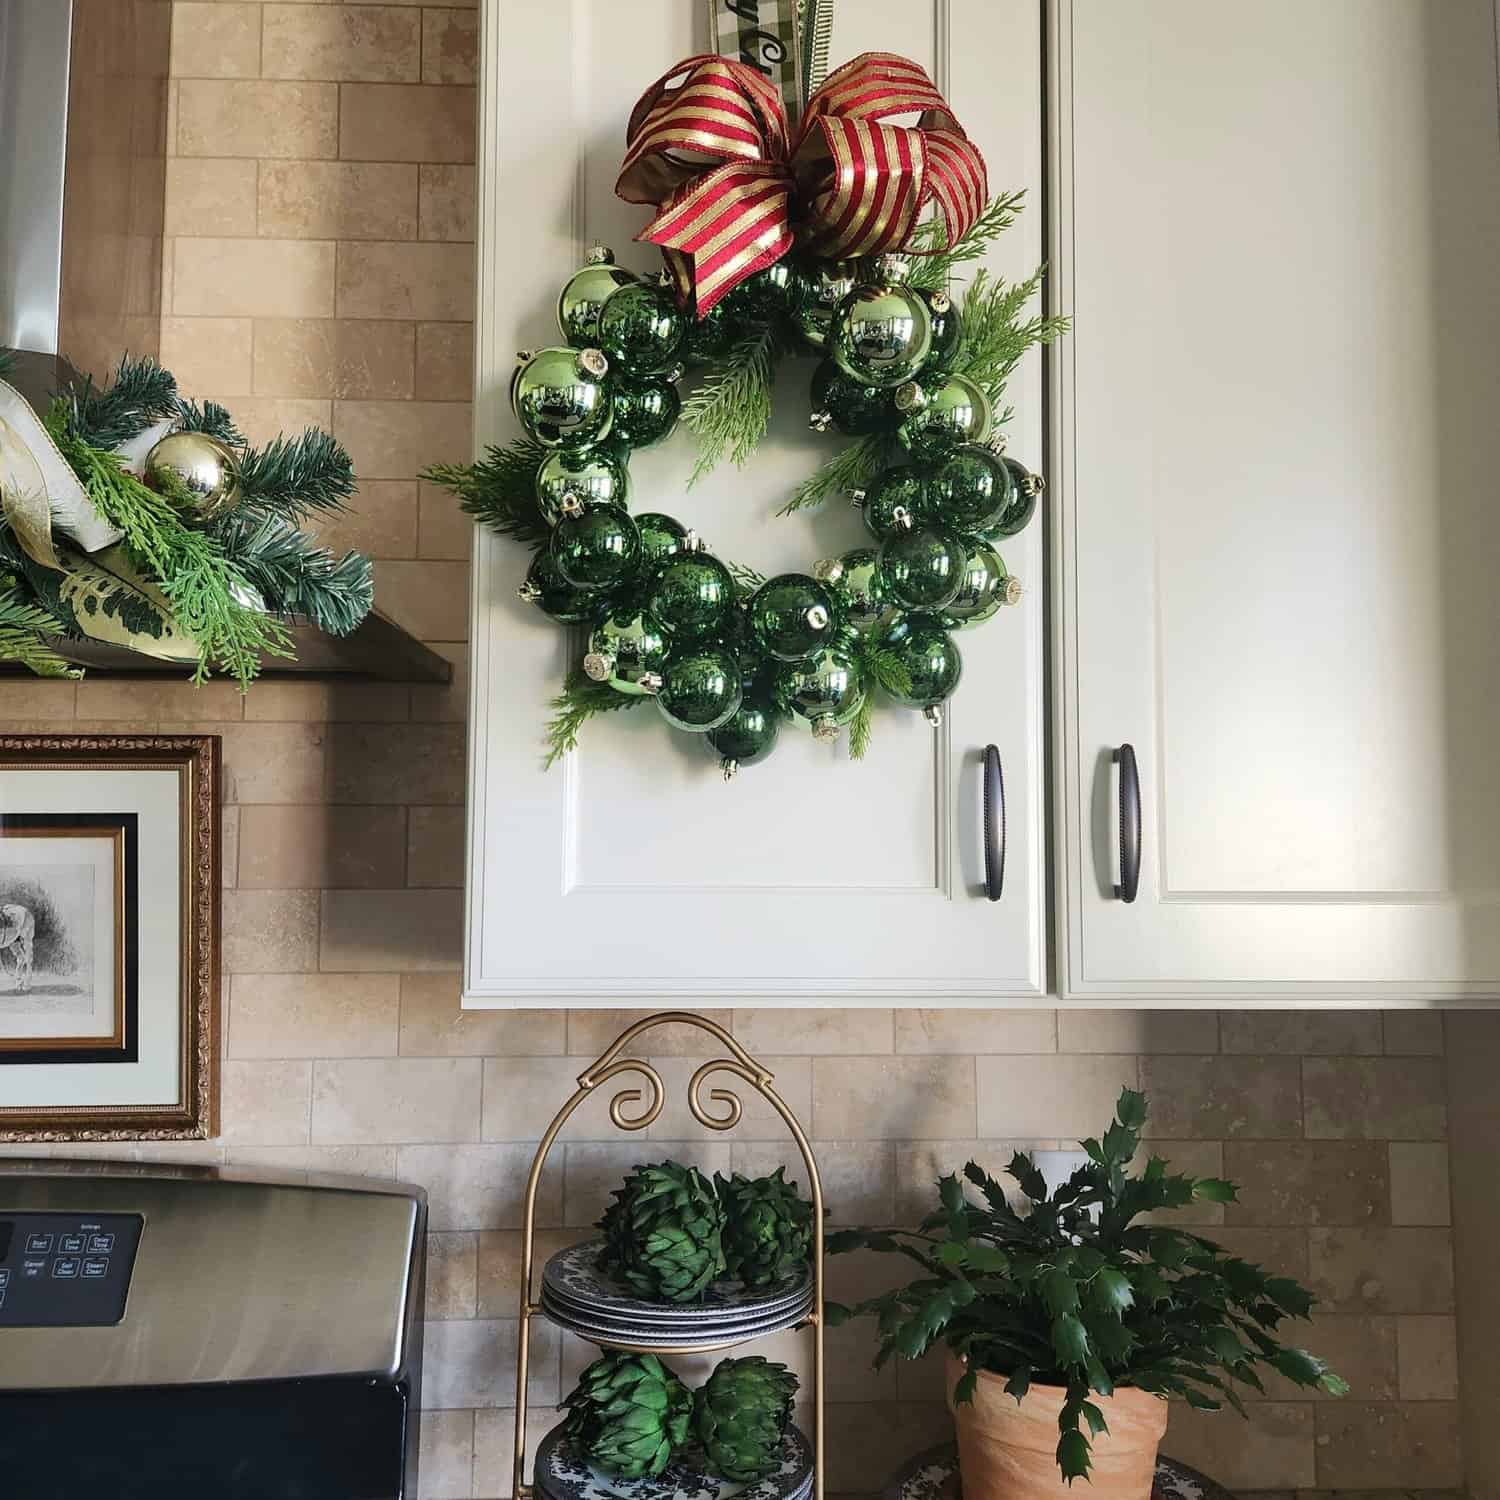 Wreath made out of green balls.